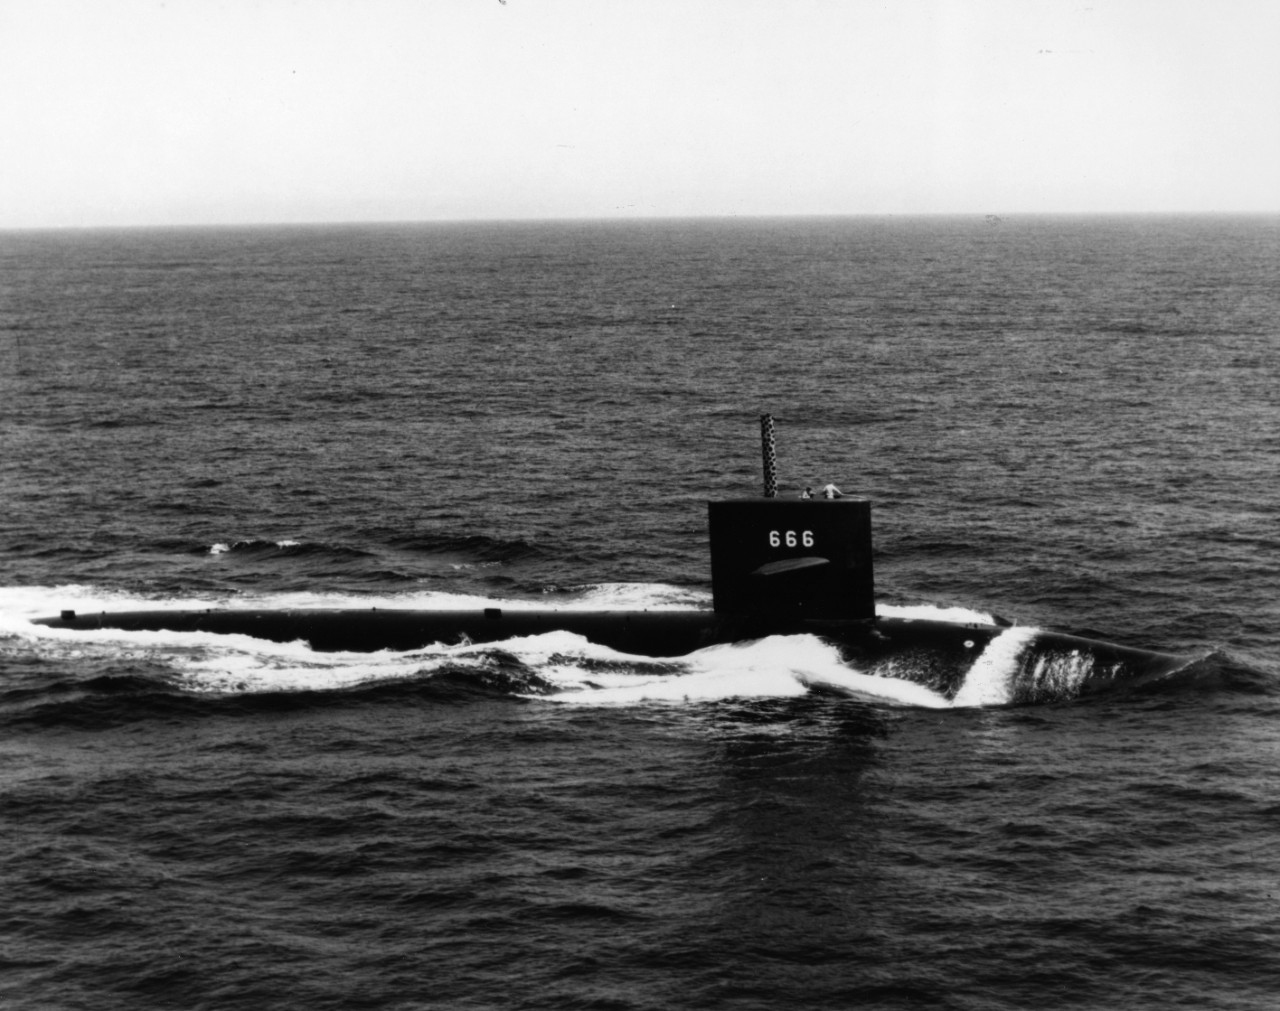 Nuclear powered submarine USS Hawkbill (SSN-666) underway off the coast of southern California